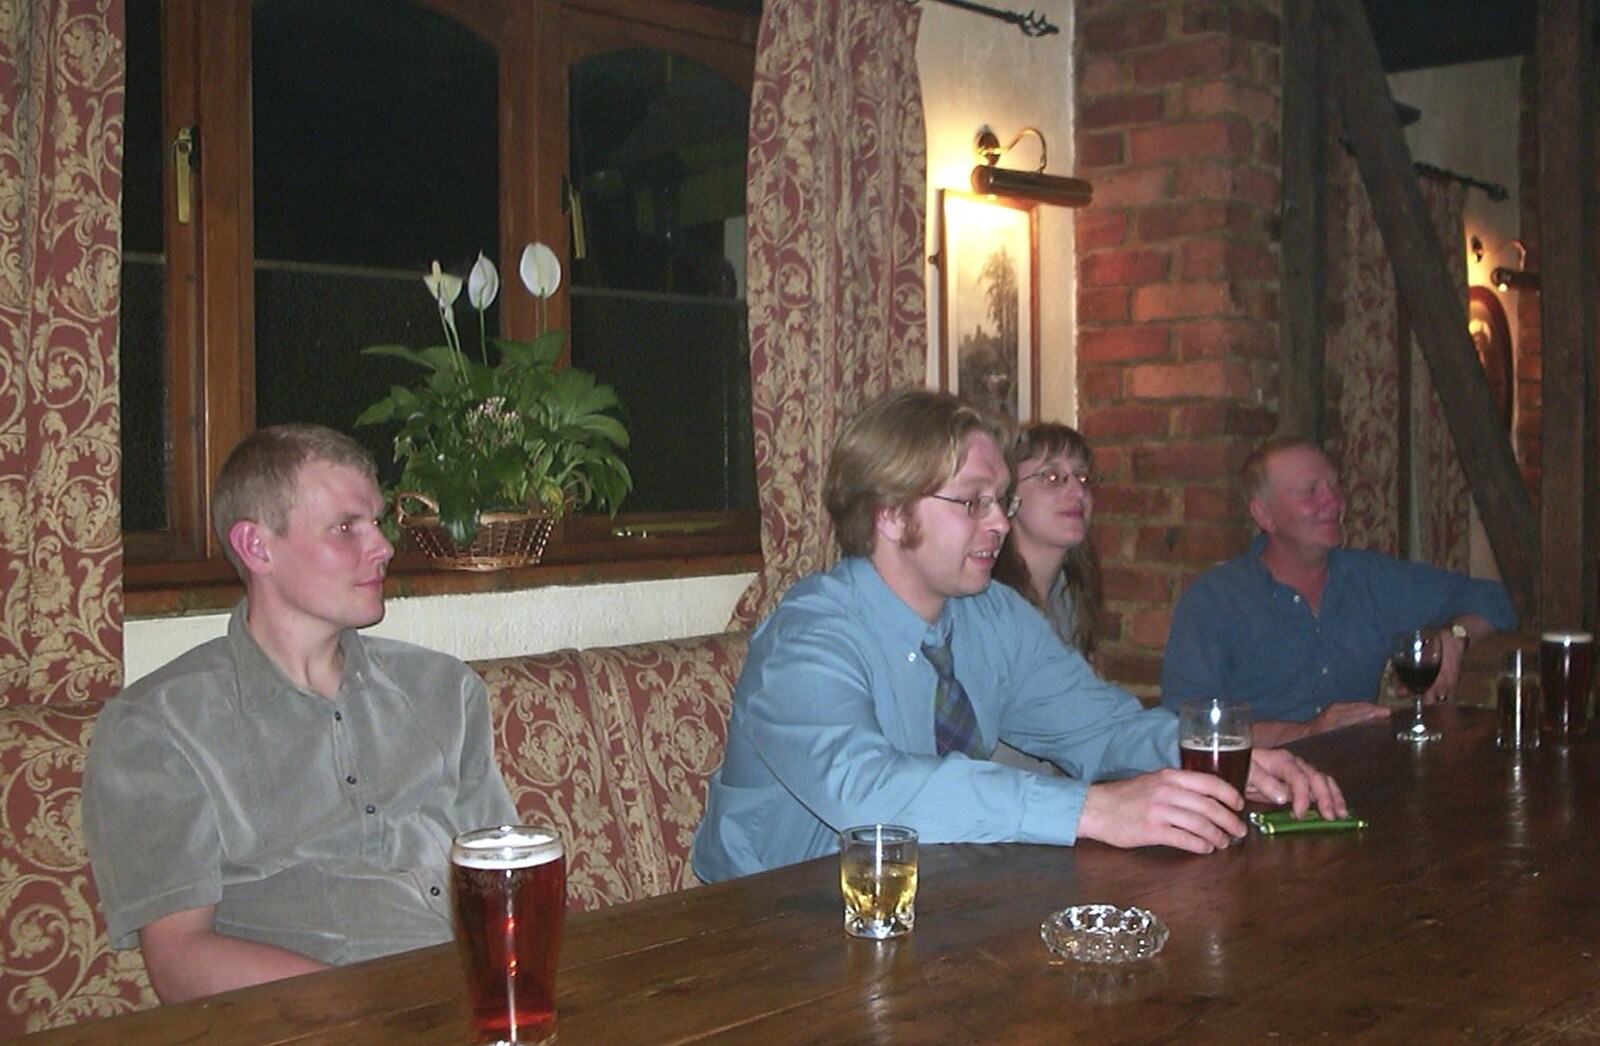 The BSCC Bike Ride, Shefford, Bedford - 11th May 2002: Back at the bar